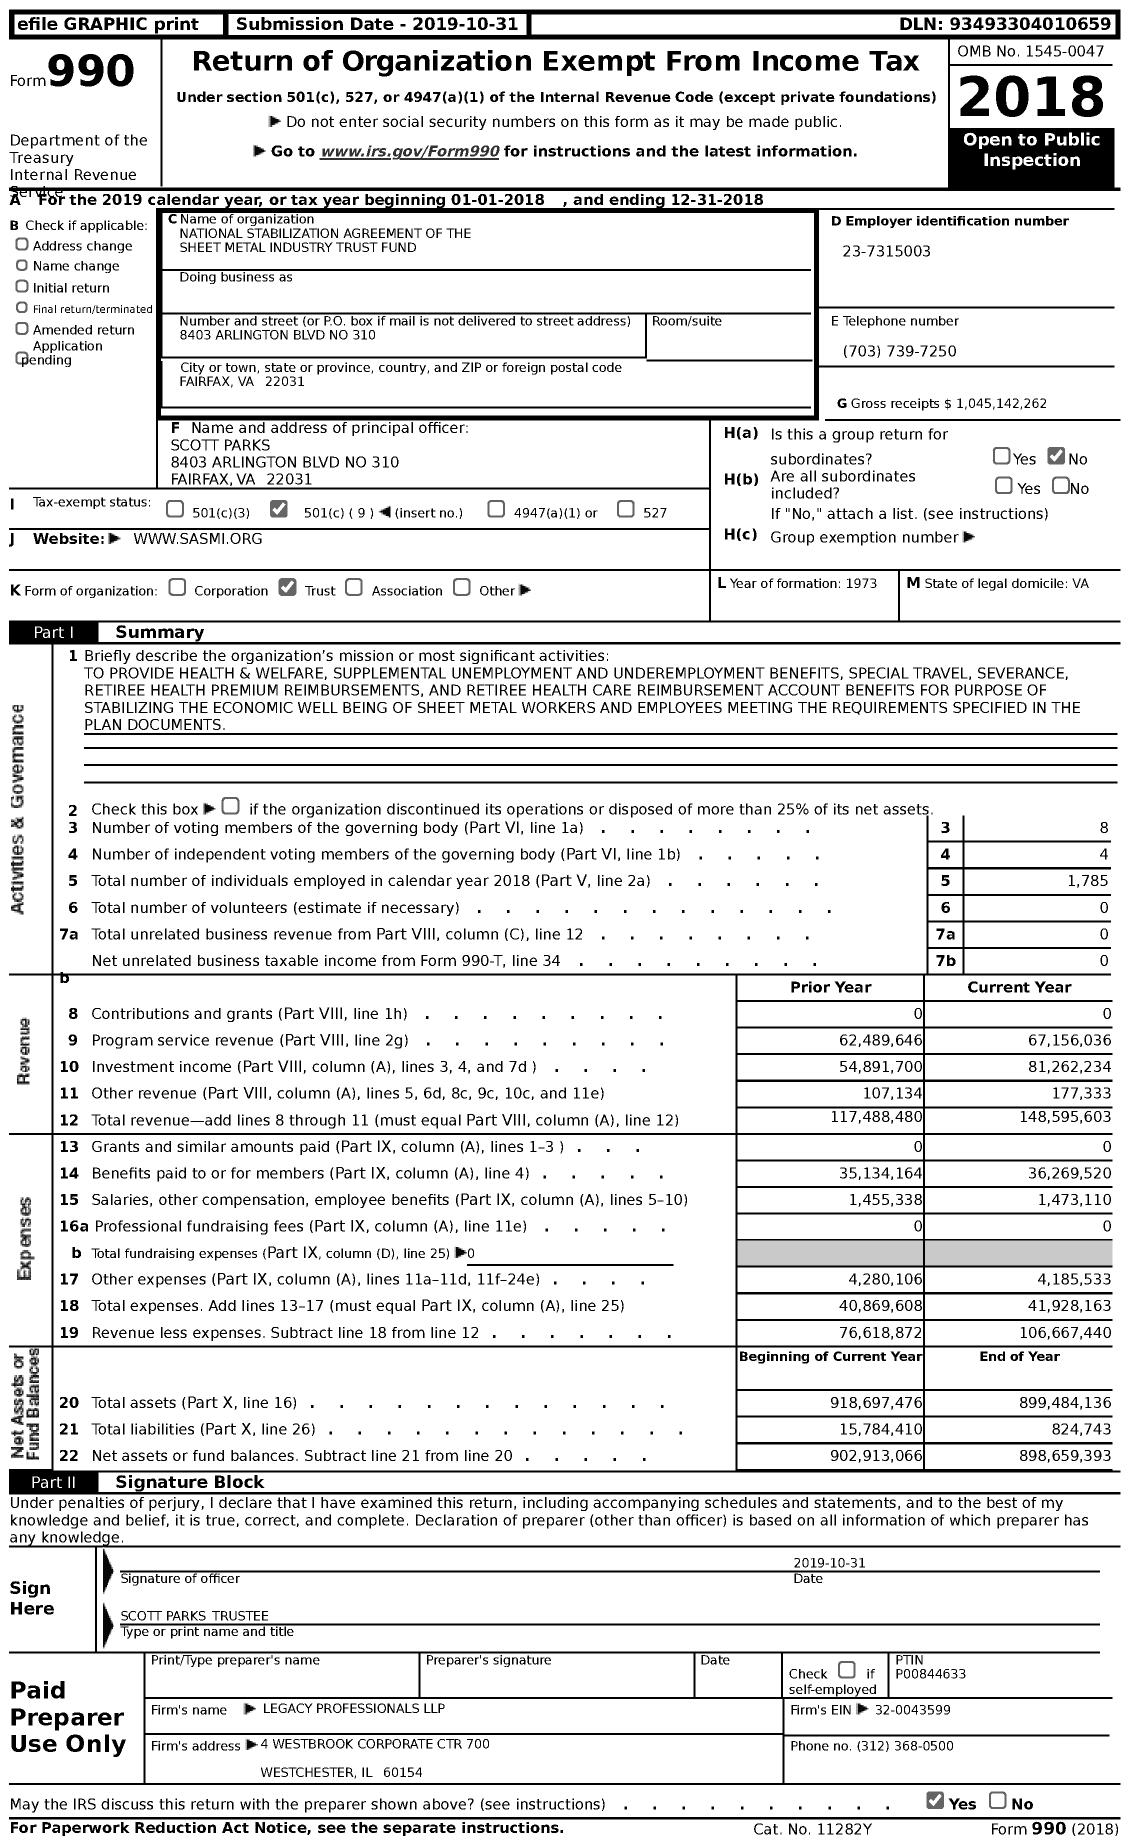 Image of first page of 2018 Form 990 for National Stabilization AGREEMENT OF The Sheet Metal Industry Trust FUND